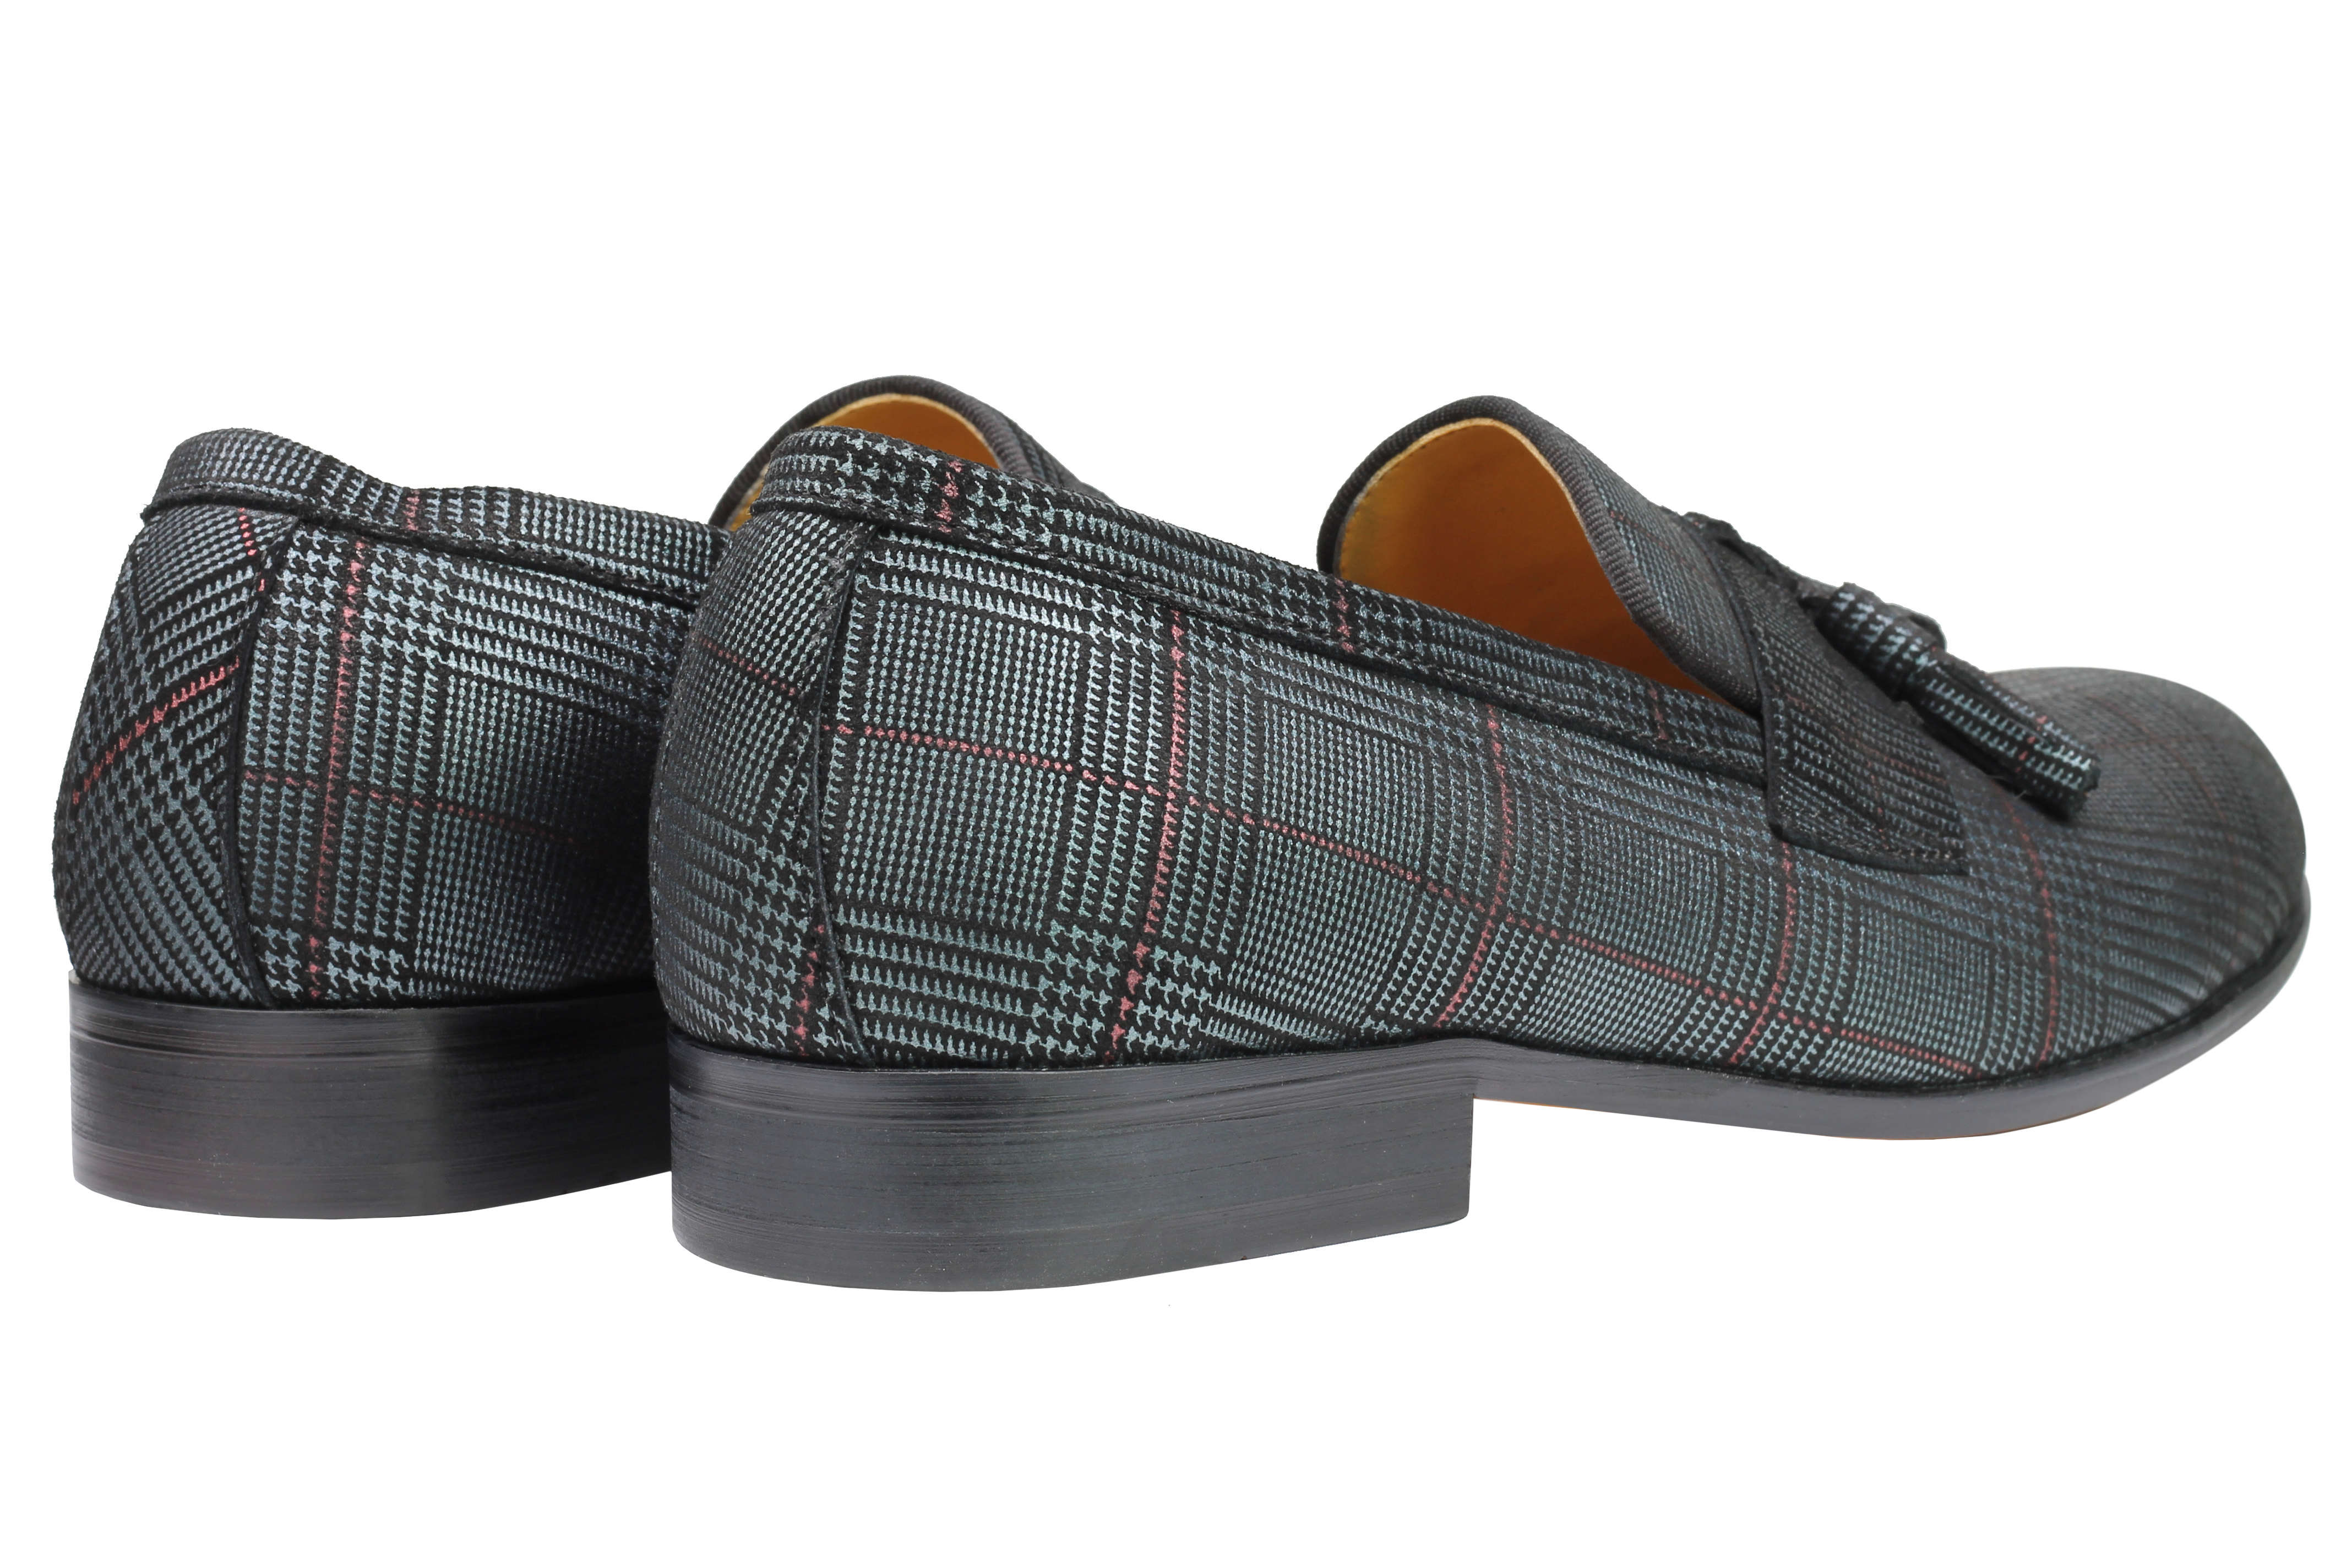 Real Blue Tweed Check Leather Loafers Black